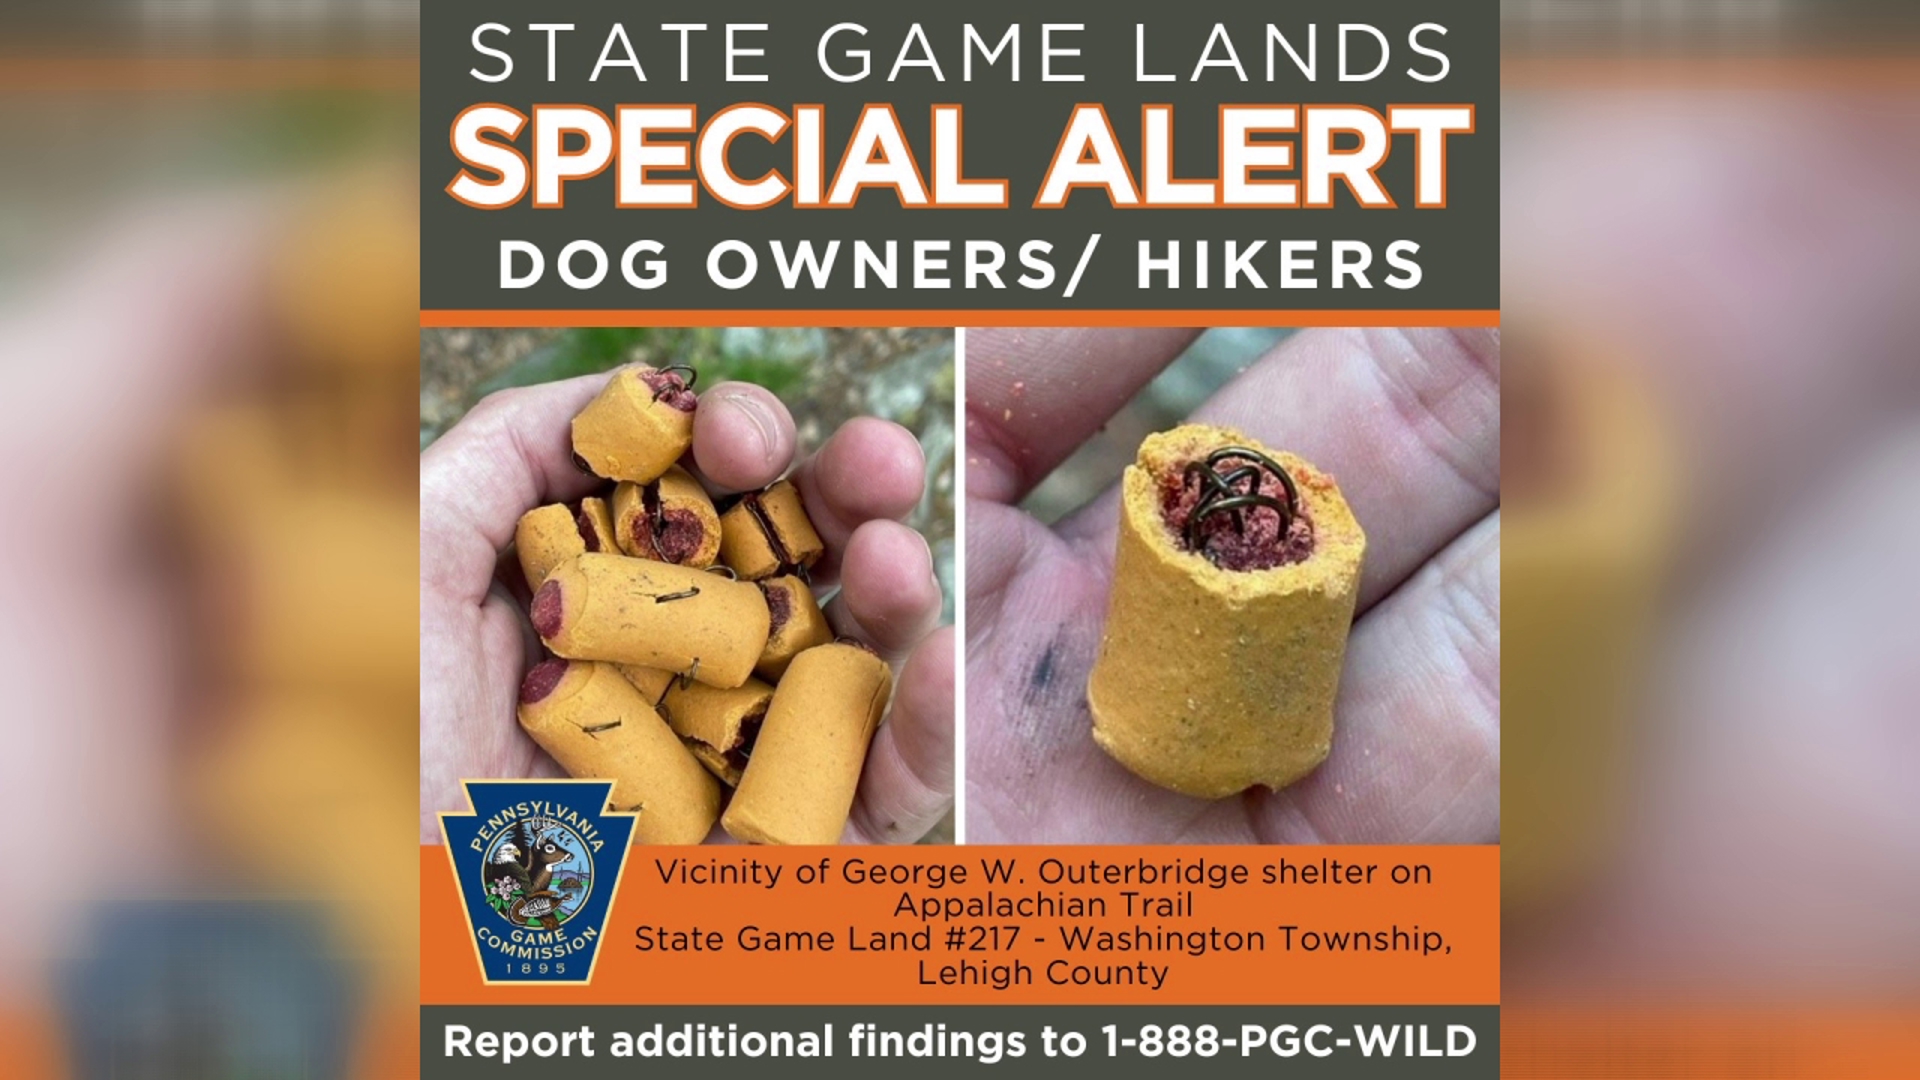 The PA Game Commission is warning hikers and dog owners of treats found containing metal fish hooks on the Appalachian Trail in Washington Township.